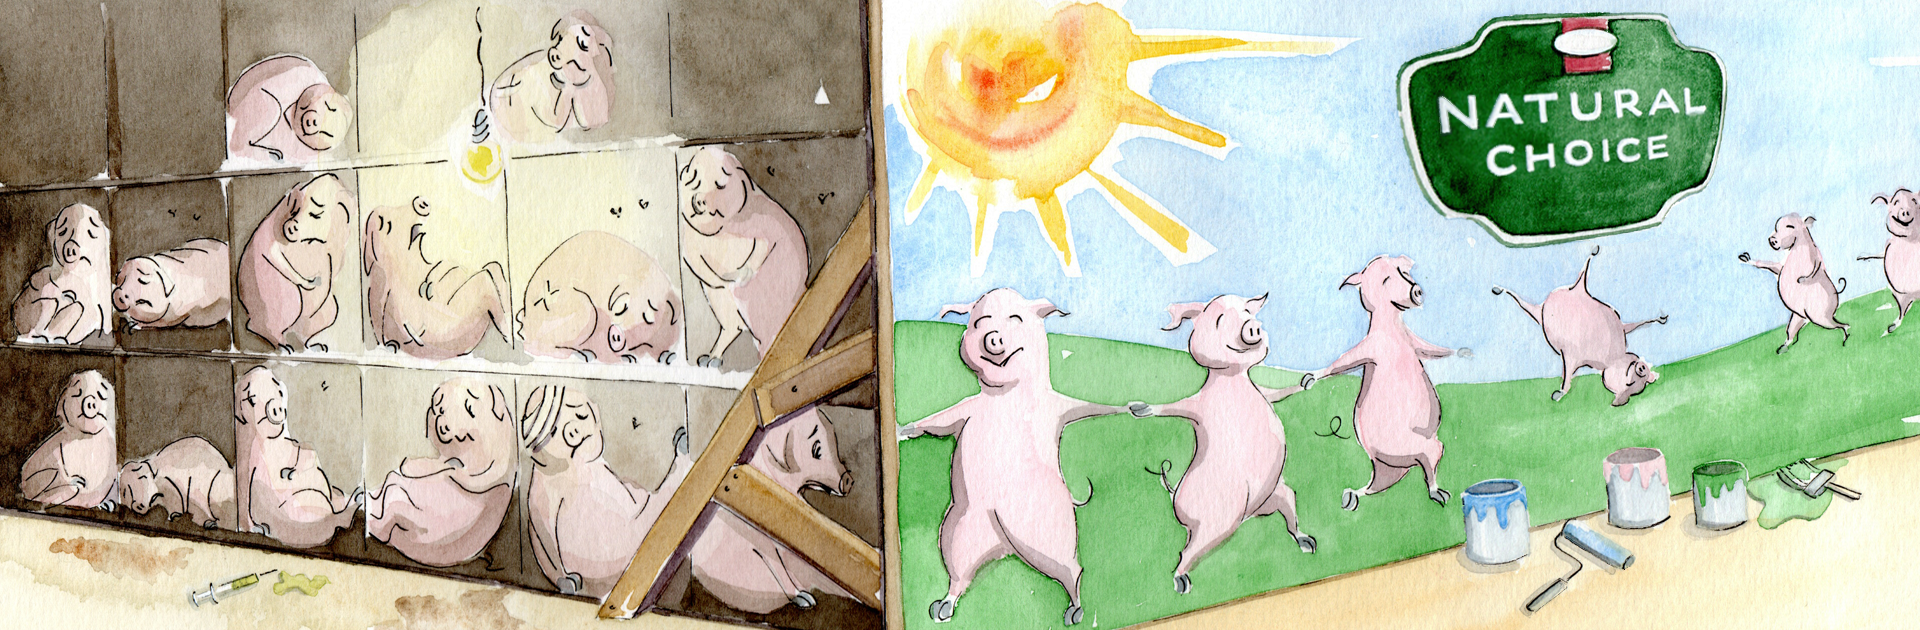 Illustration of pigs in a pen on the left side and pigs dancing in a field on the right